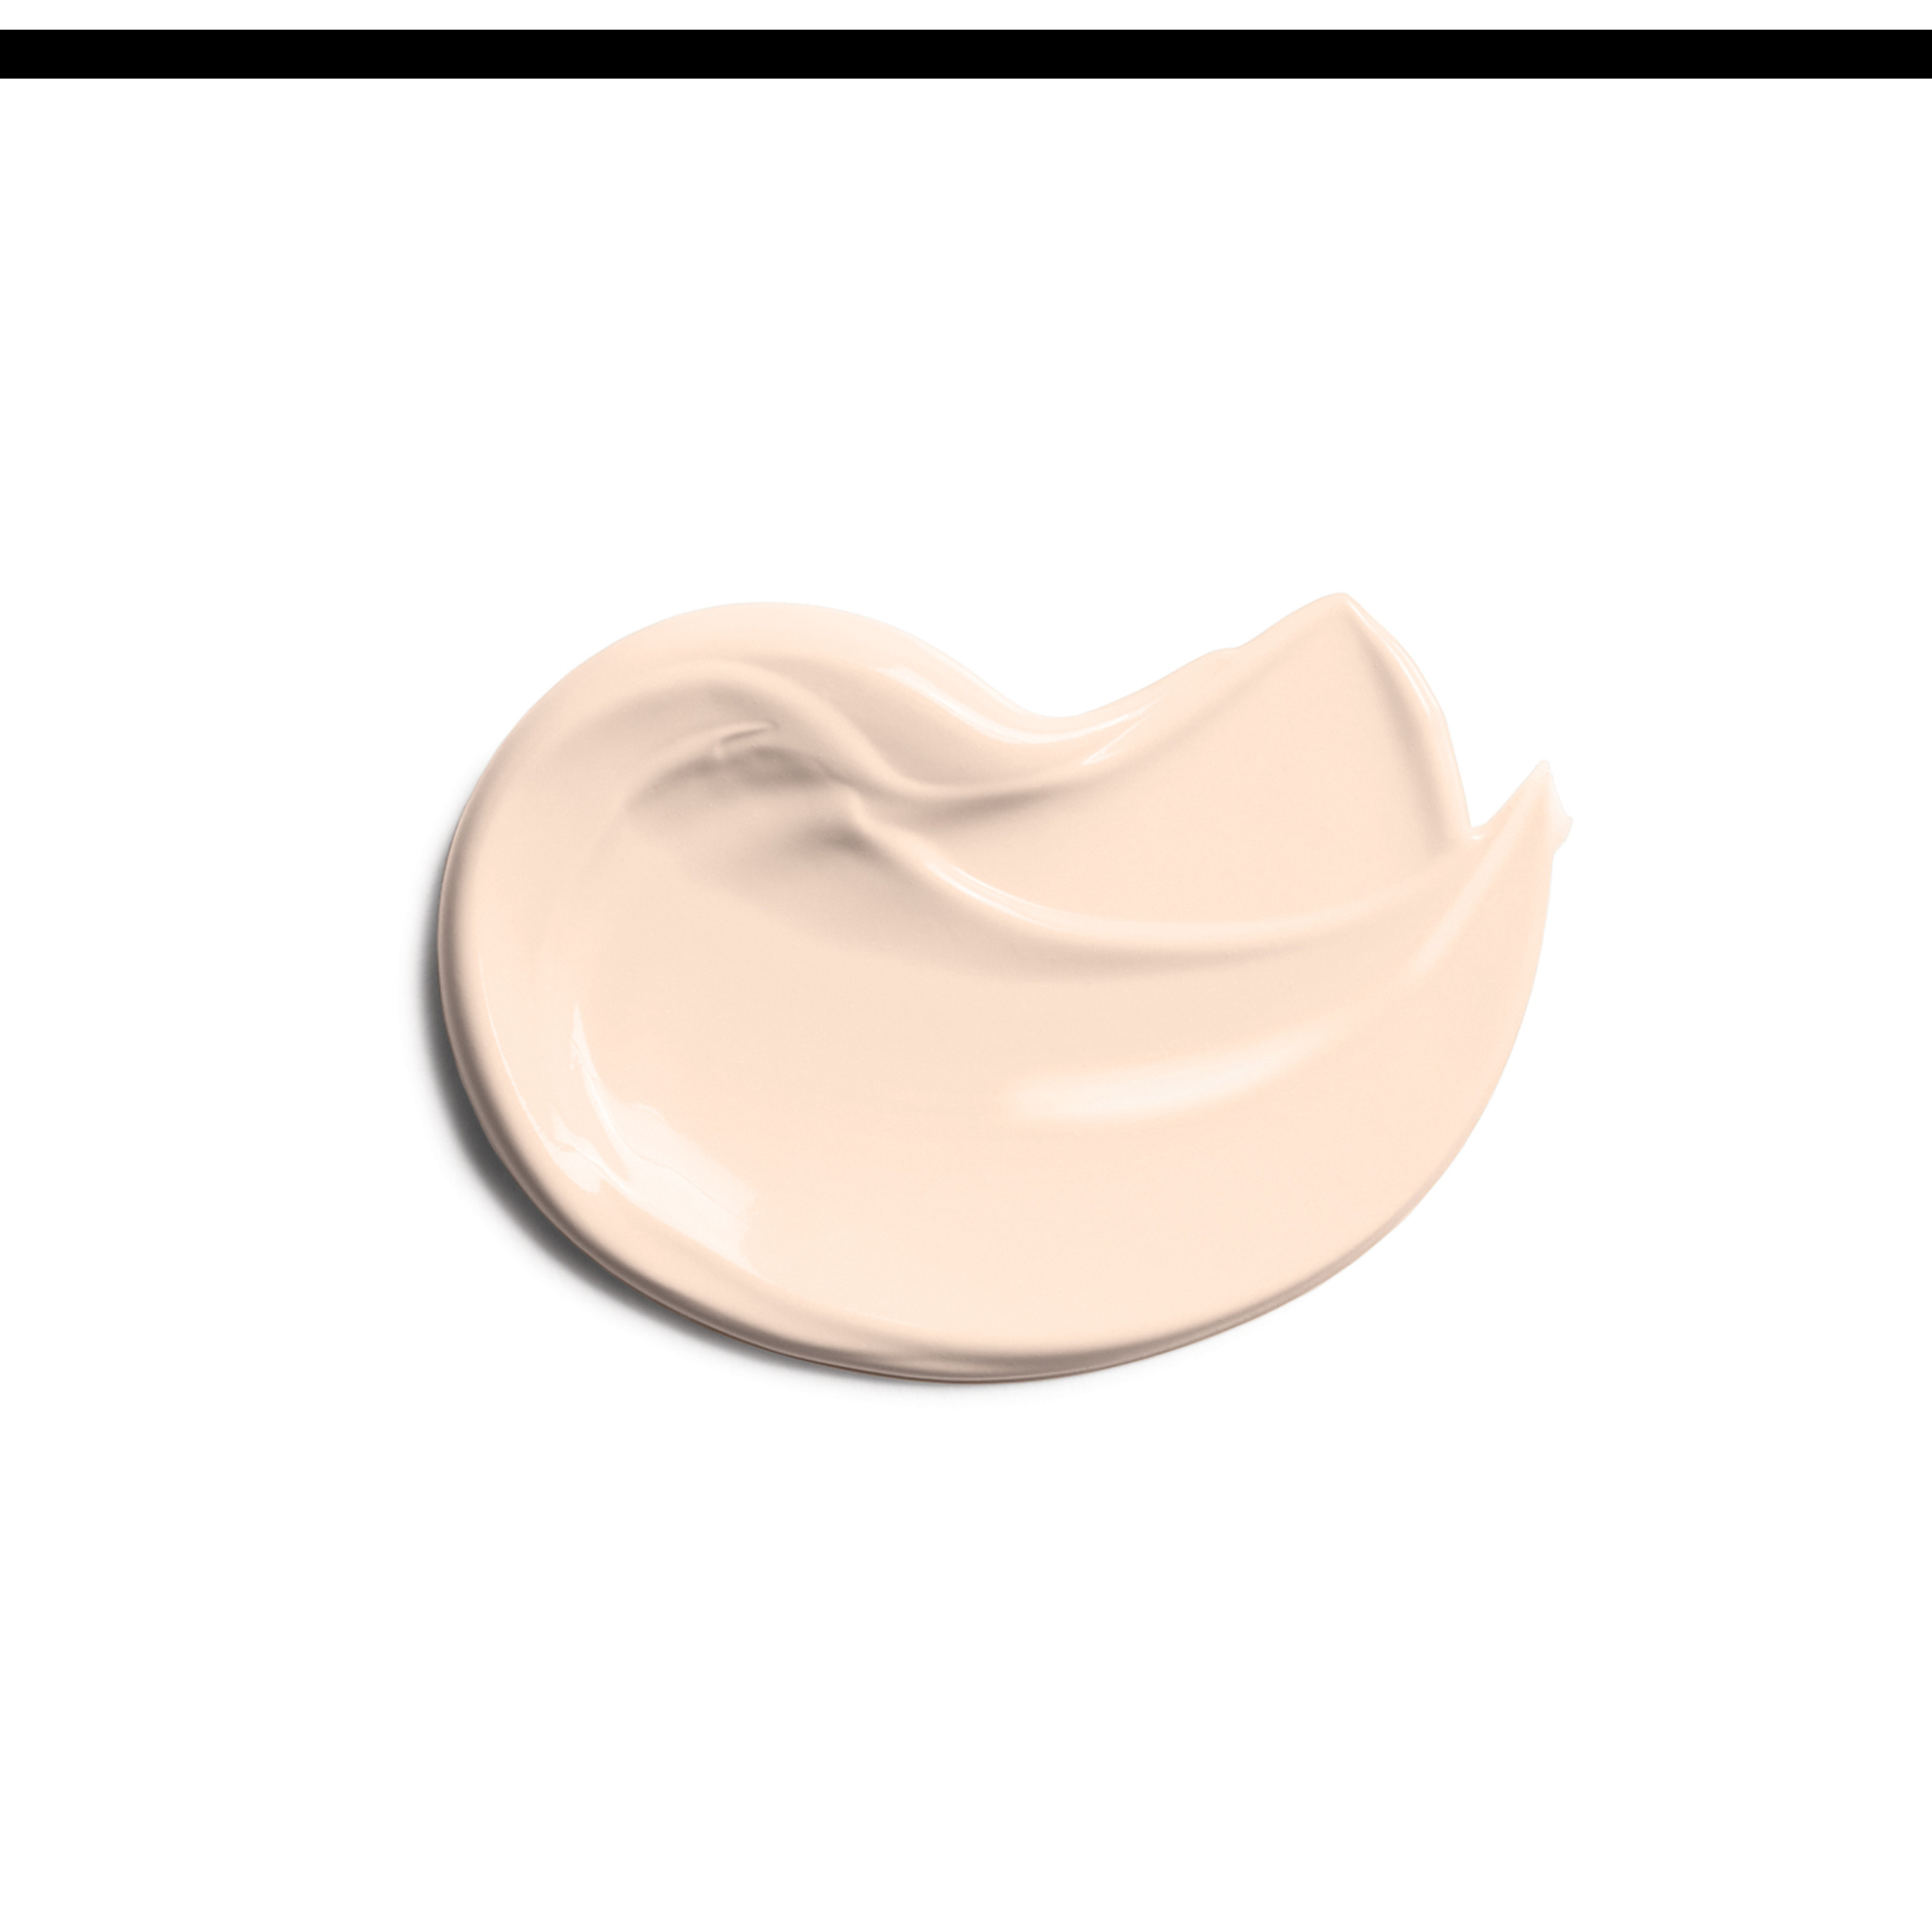 COVERGIRL Smoothers Hydrating Foundation, 705 Ivory, 1 Fl Oz, Hydrating Foundation, Cruelty Free Foundation, Liquid Foundation, Cream Foundation, Moisturizing Foundation - image 3 of 9